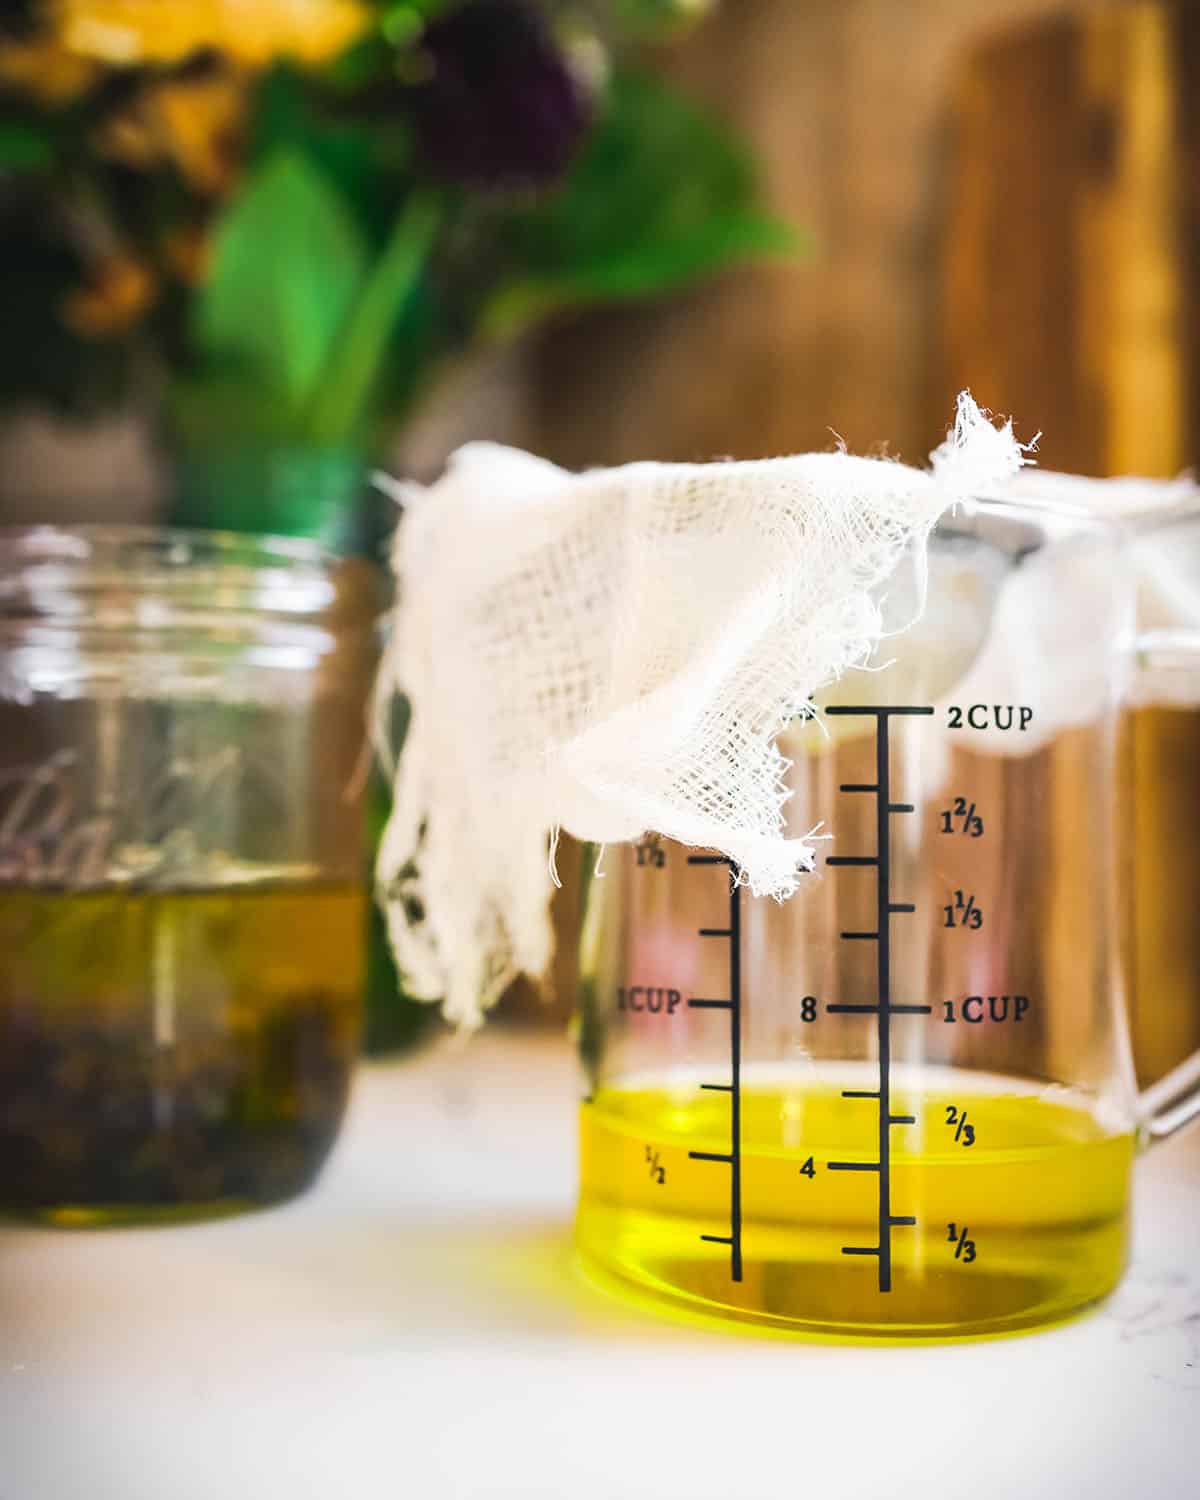 A jar of strained dandelion infused oil, with cheese cloth resting on top. 